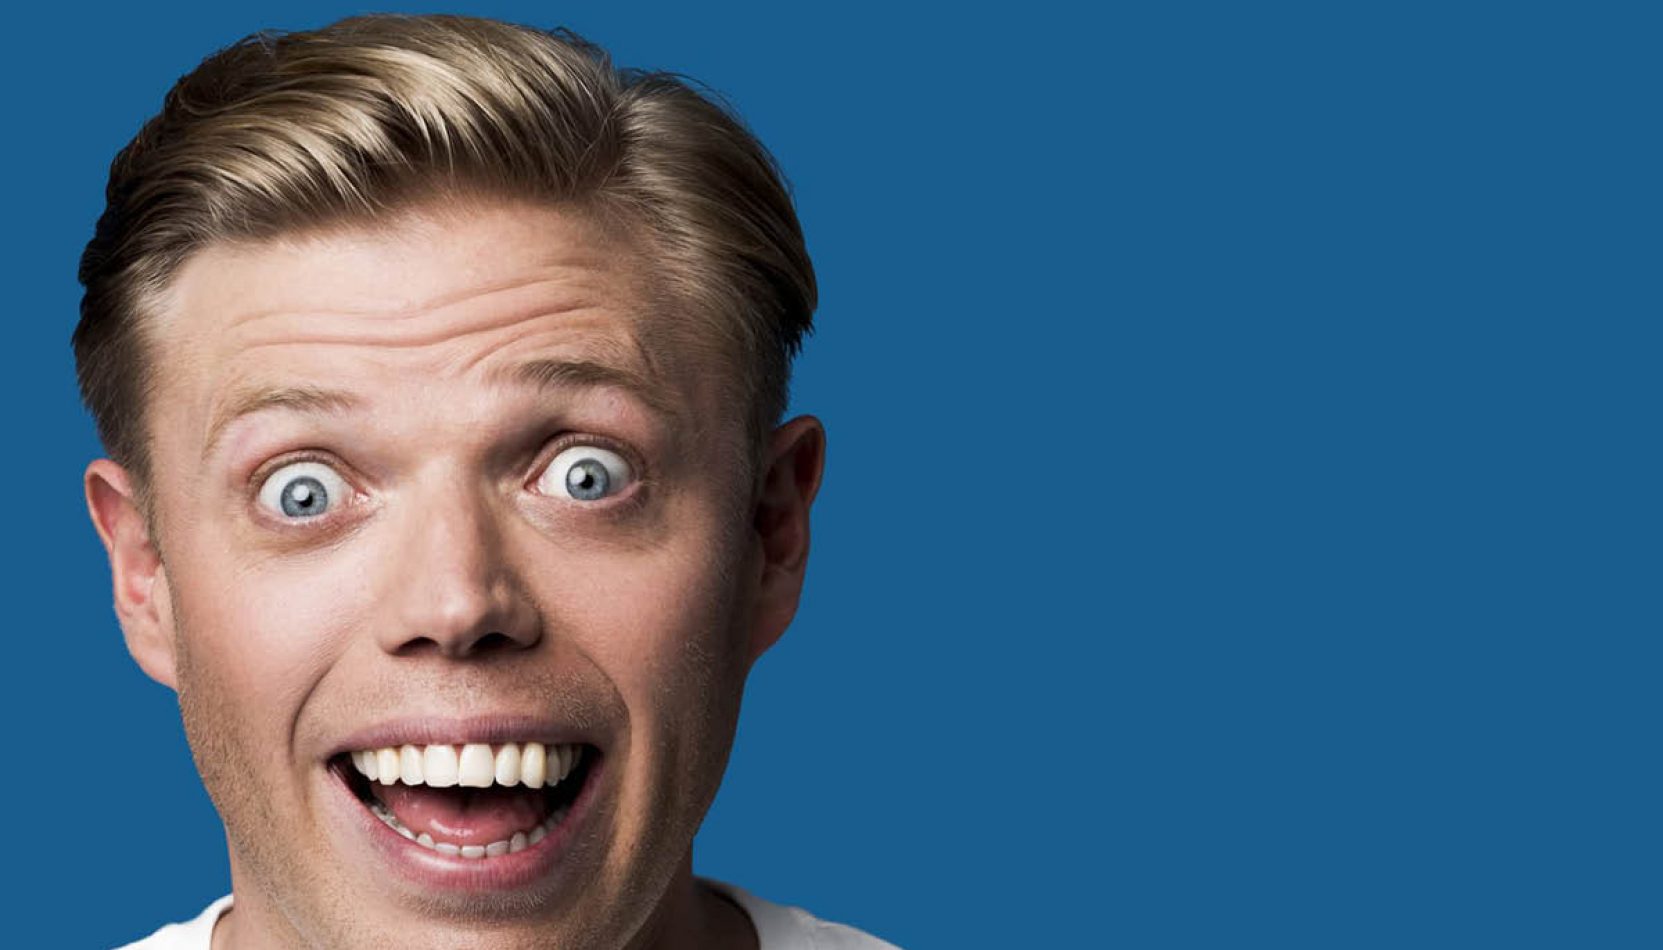 guide to, guide to woking, guide to whats on, whats on, whats on surrey, guide to comedy, rob beckett, mouth of the south, comedy, stand-up comedy, stand up comedian, woking, new victoria theatre woking, new victoria theatre